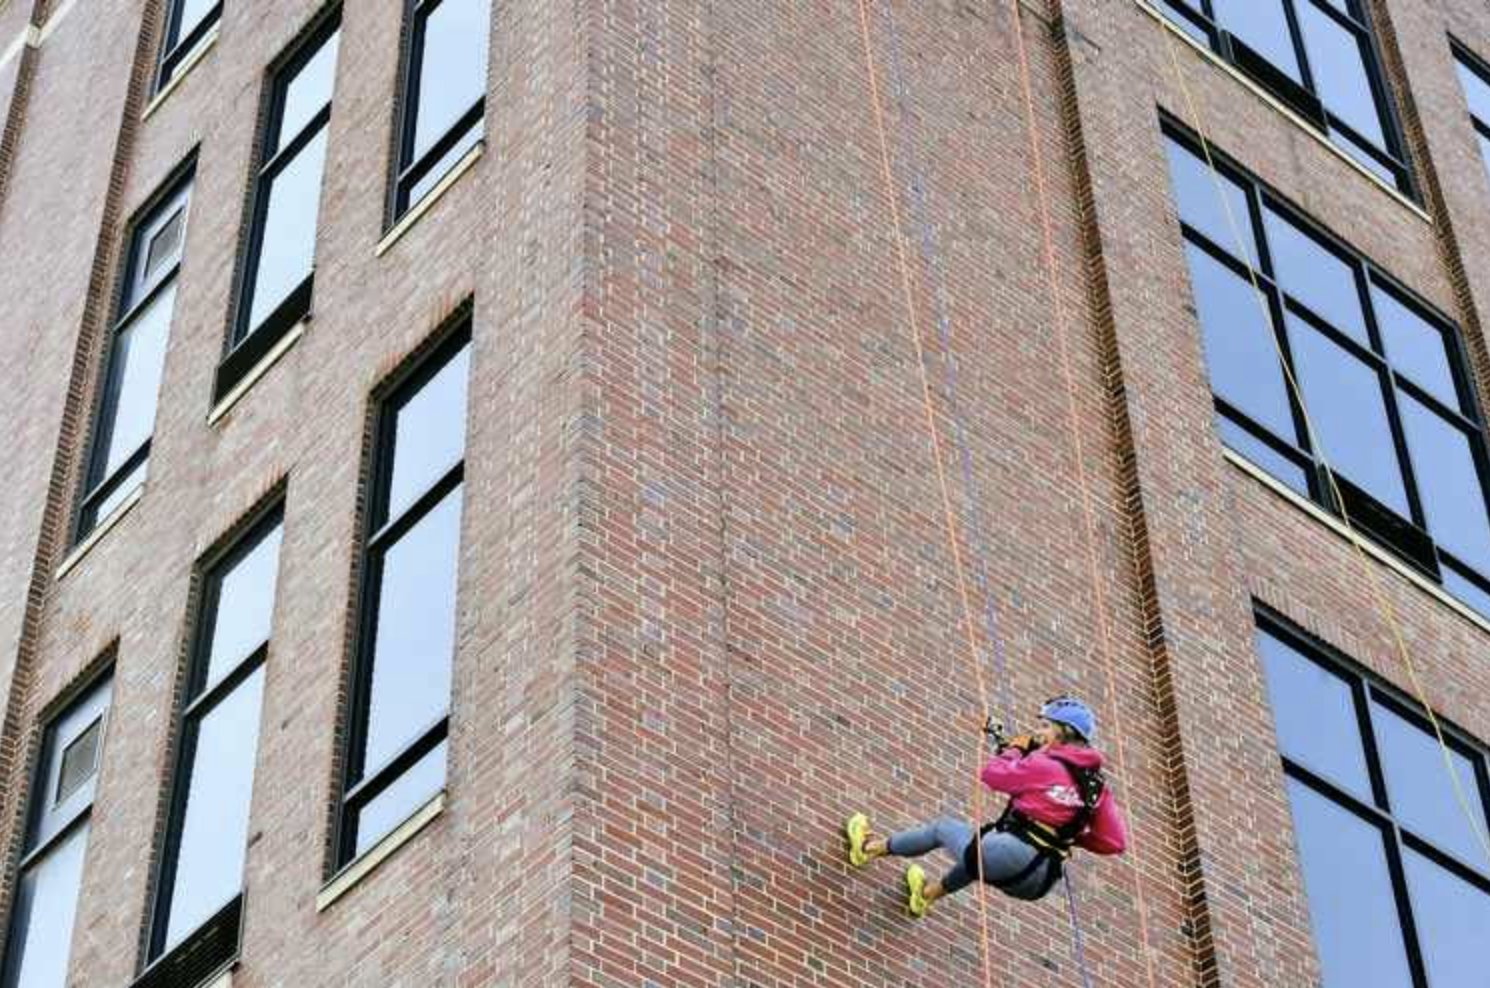 A person is climbing up the side of a brick building